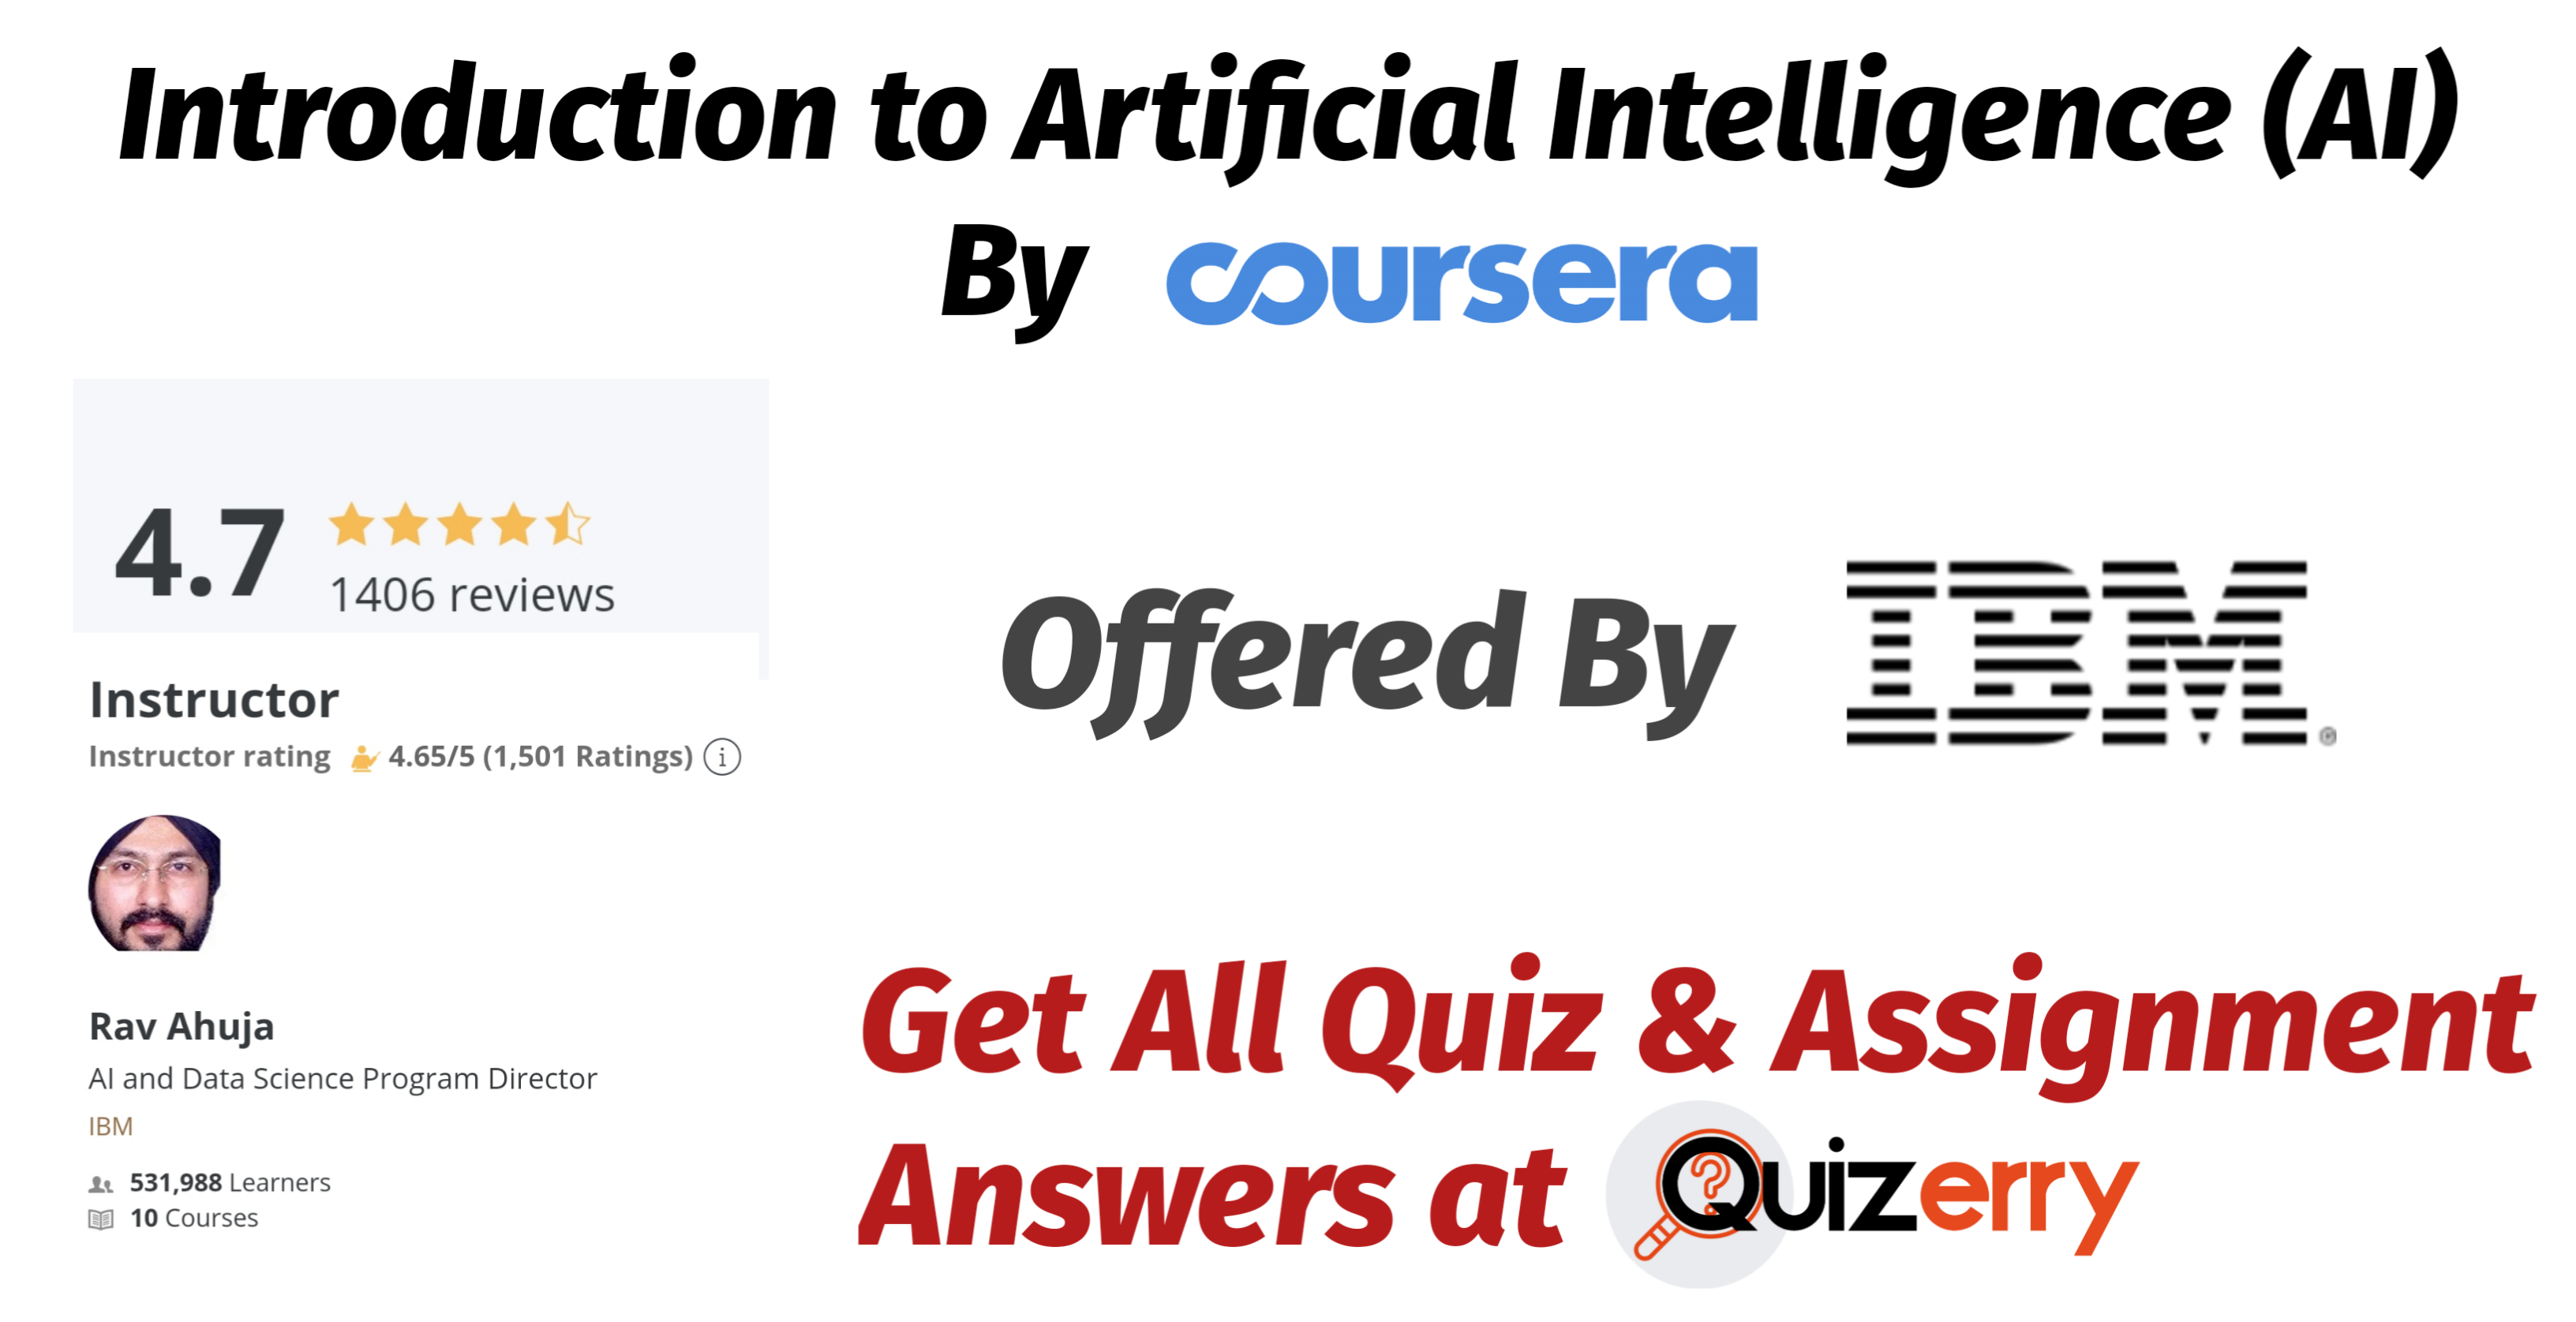 Introduction to Artificial Intelligence (AI) - Coursera Quiz Answers